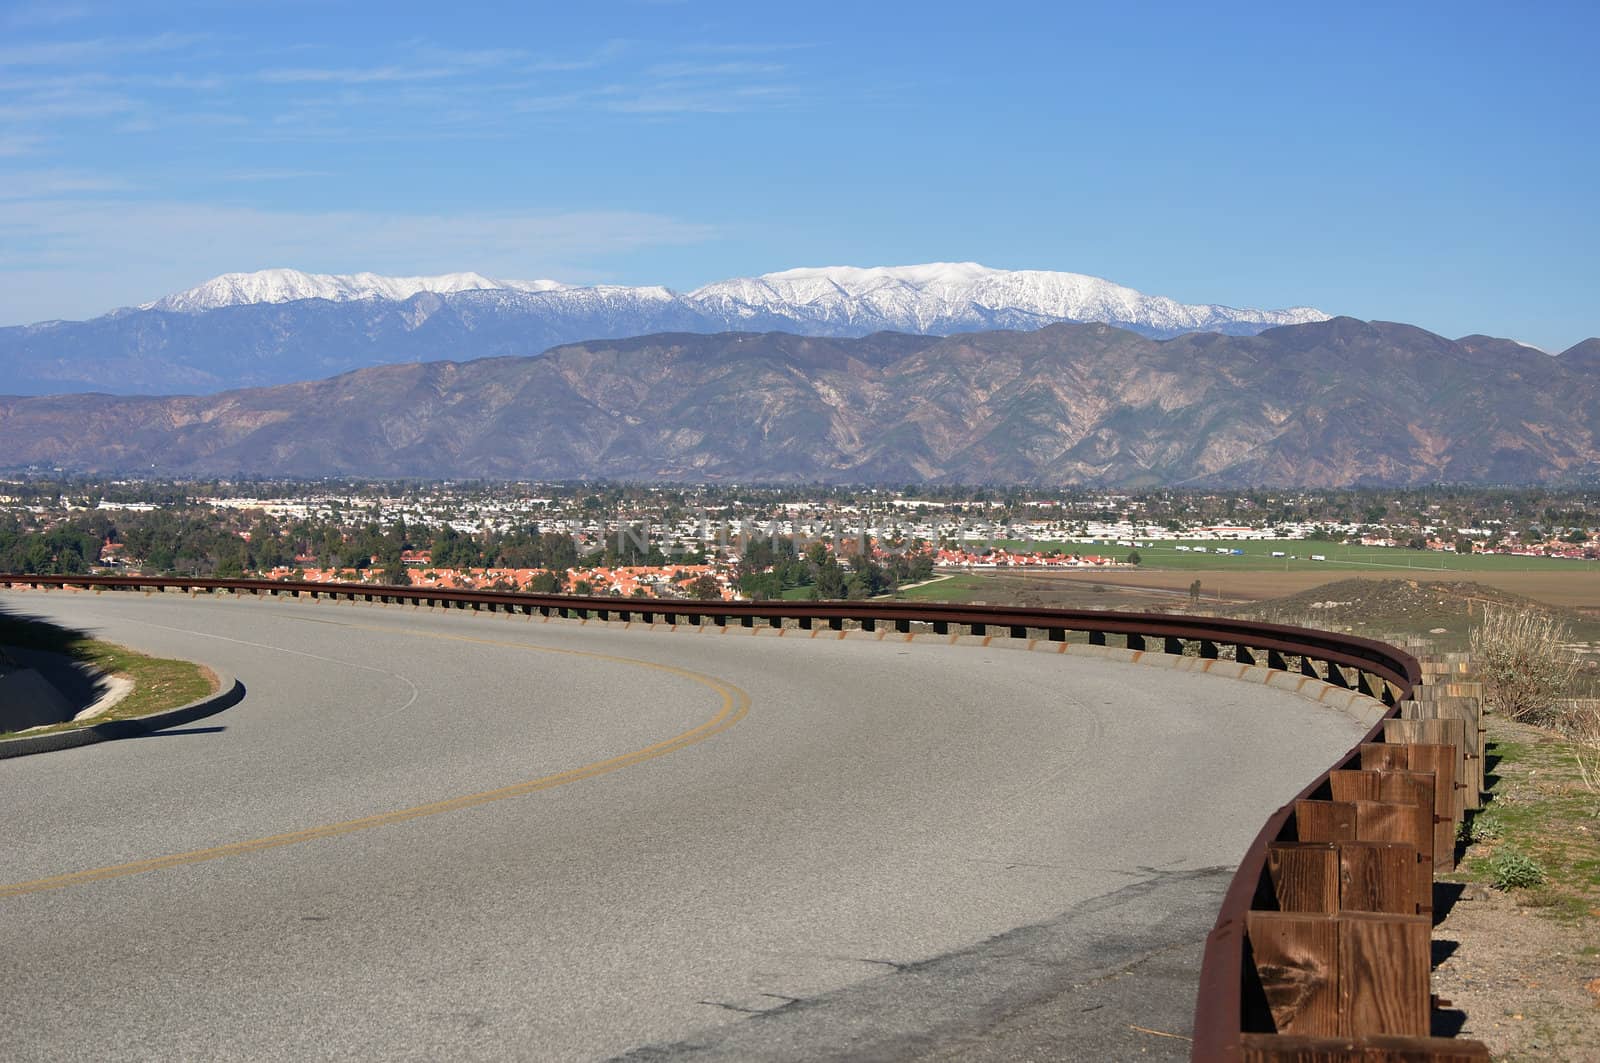 A curving road overlooks the town of Hemet, California with snow-capped Mount San Gorgonio in the background.